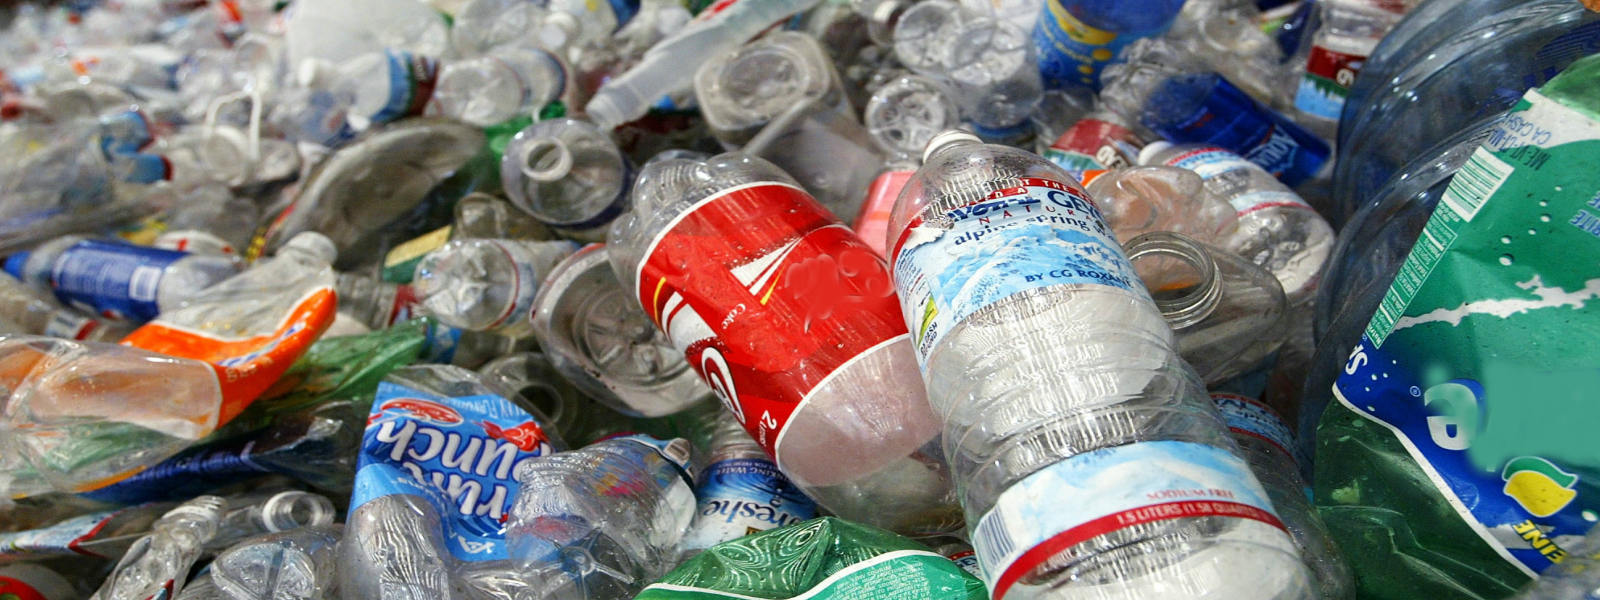 Single-use plastic & polythene products to banned